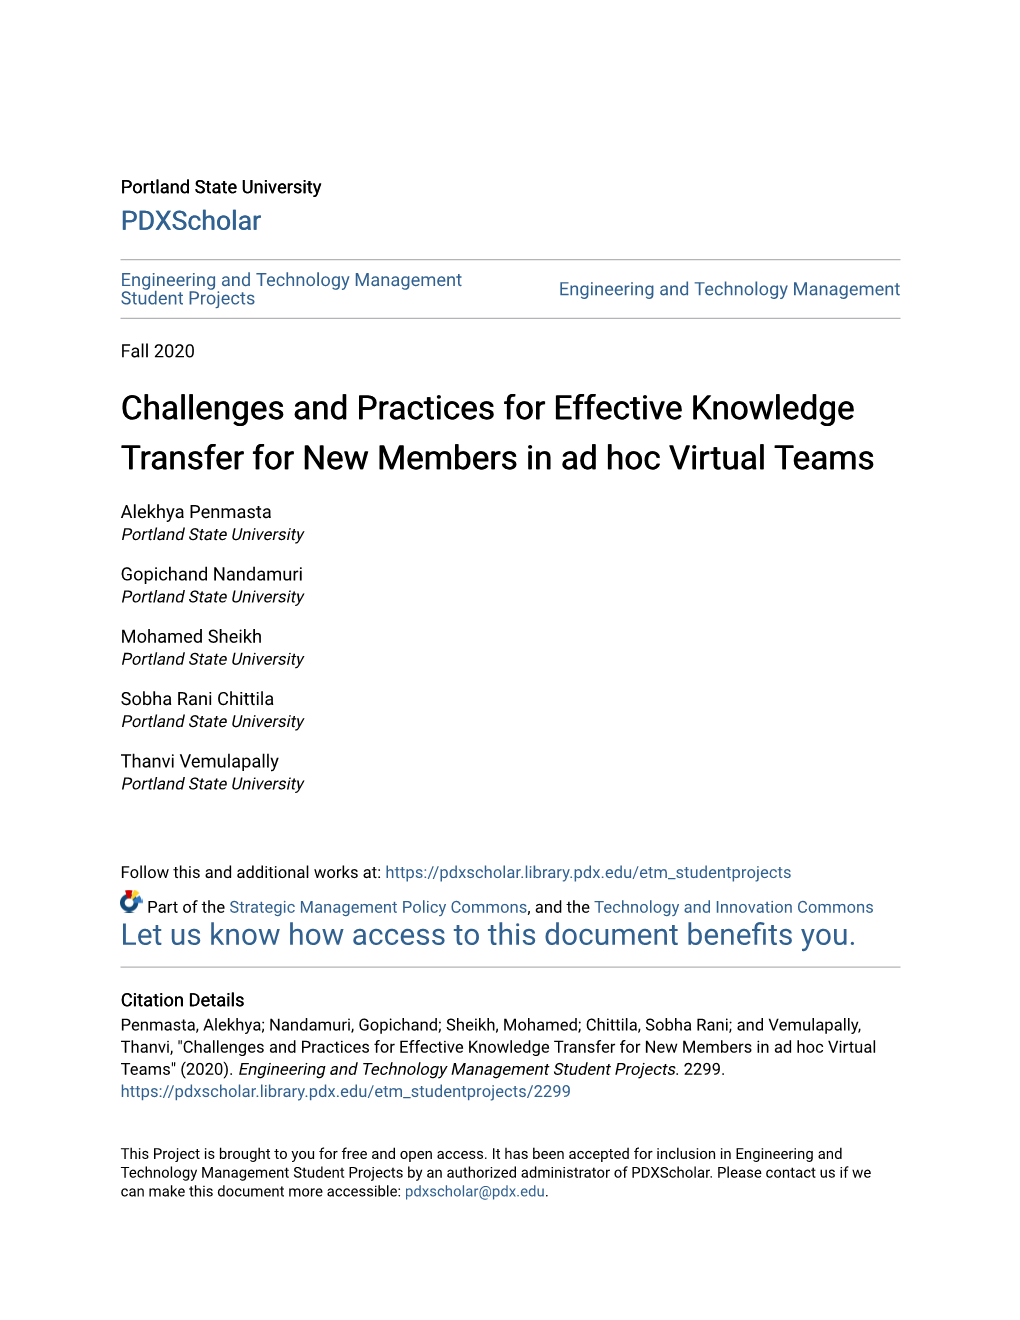 Challenges and Practices for Effective Knowledge Transfer for New Members in Ad Hoc Virtual Teams